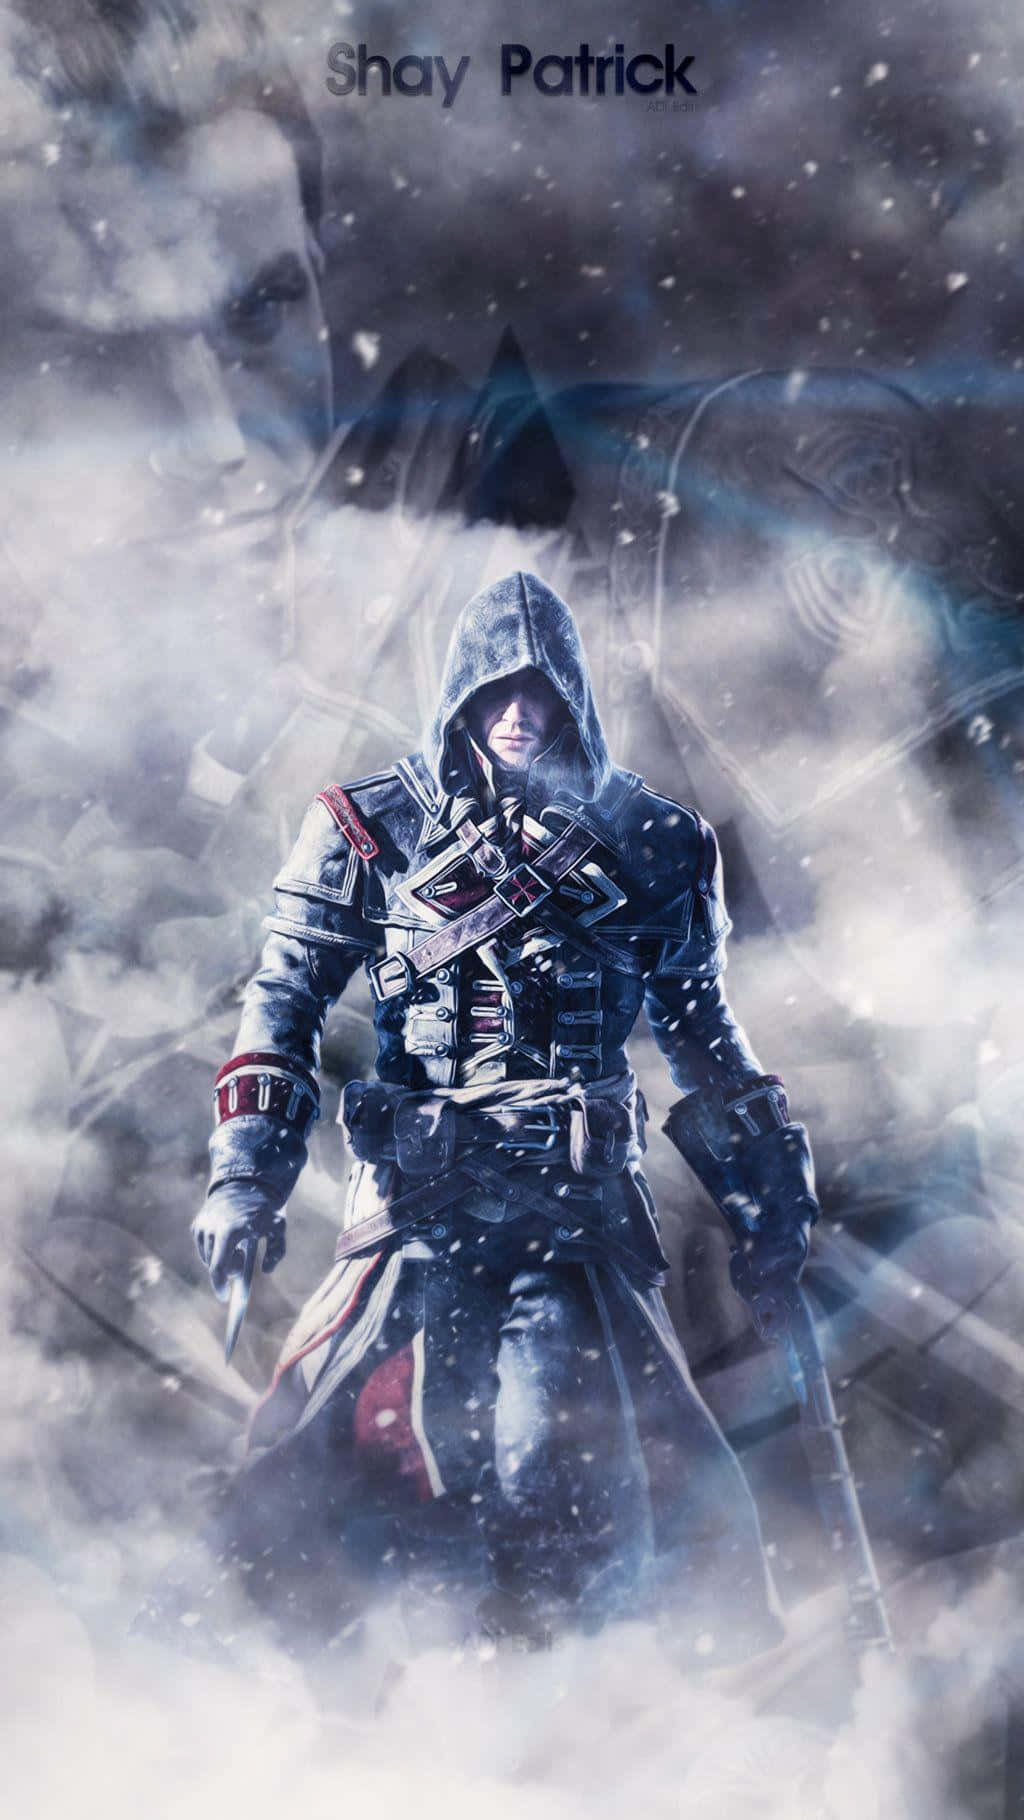 Play Assassins Creed On The Go - Experience Open World Action On Your Iphone! Background